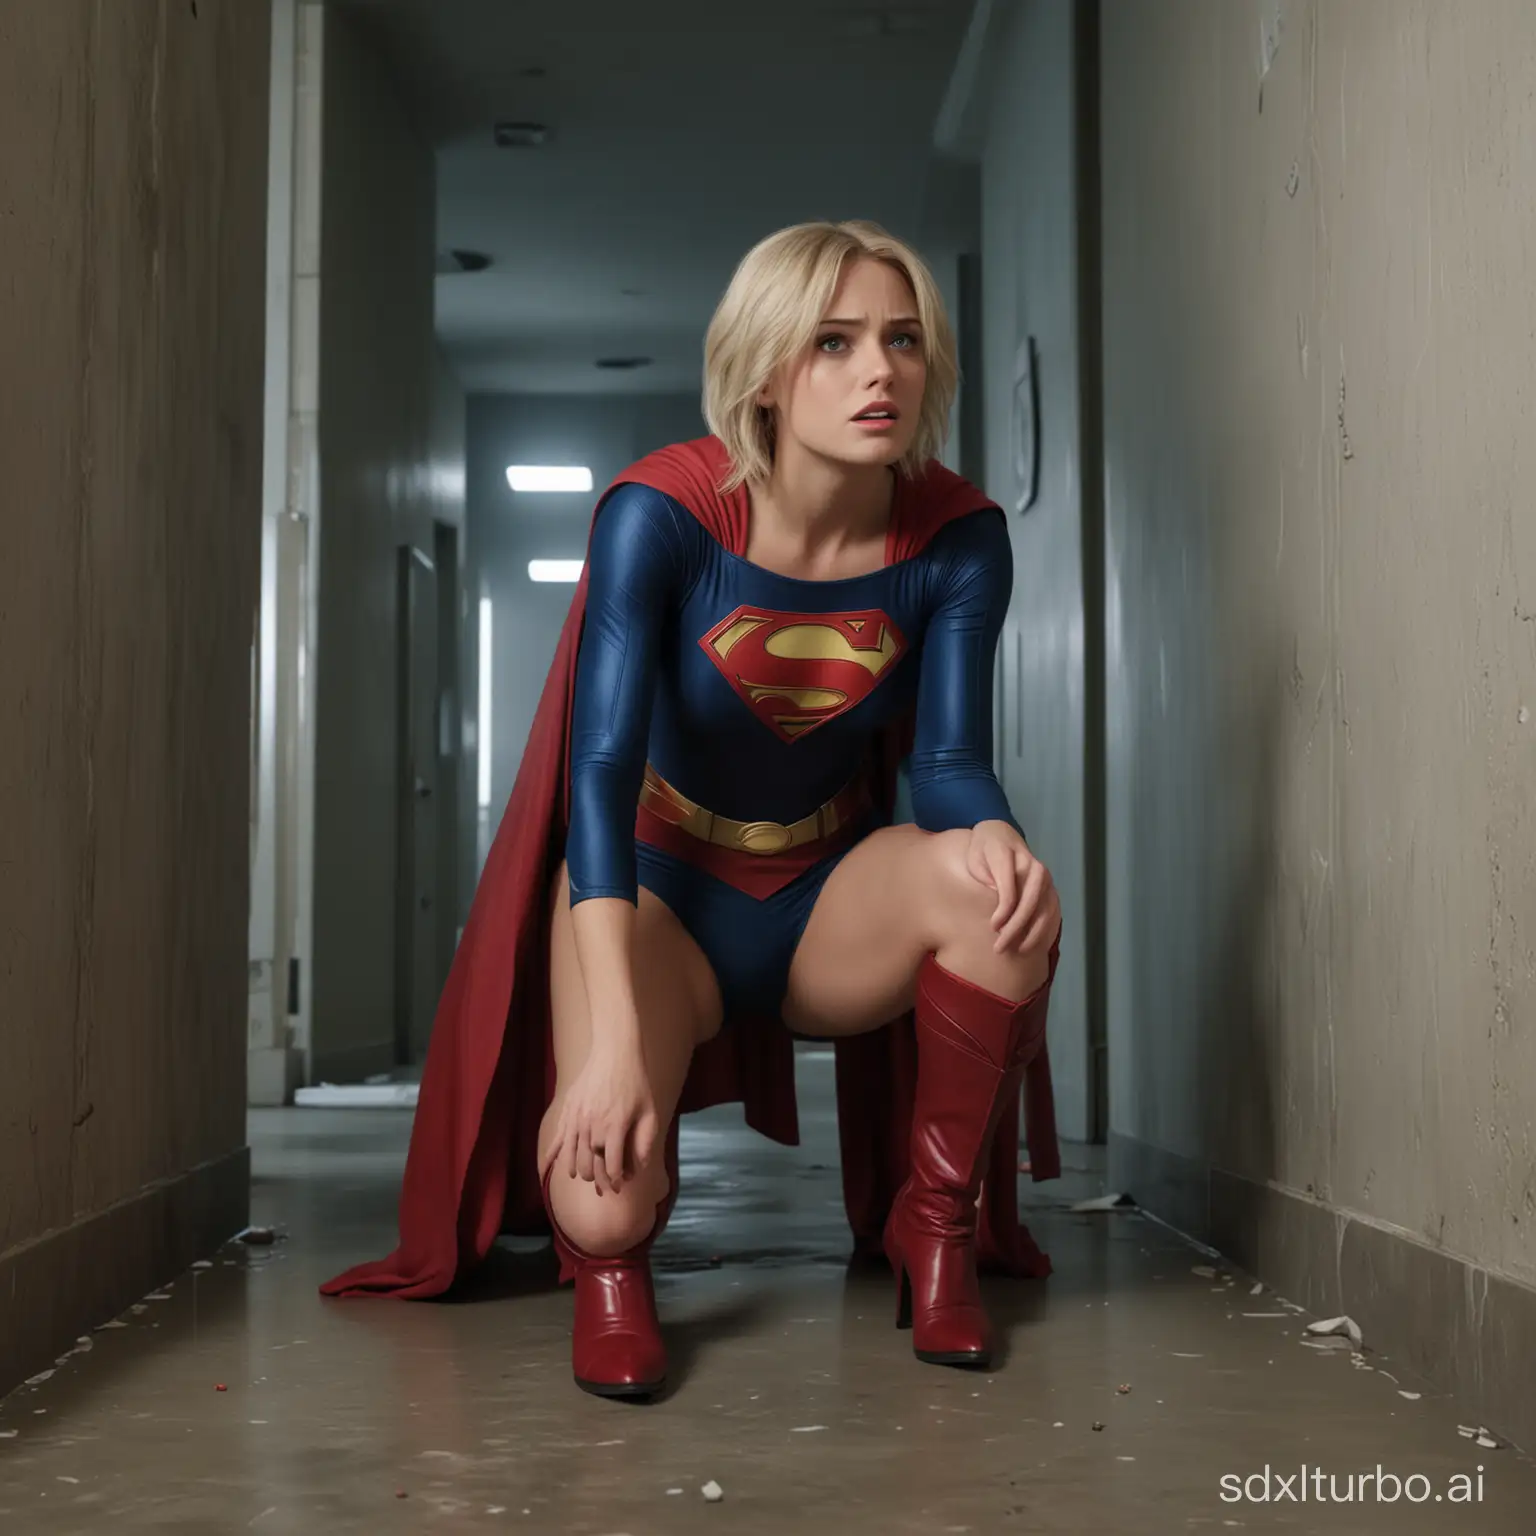 Androgynous-Supergirl-Trapped-in-Room-Gasping-in-Shock